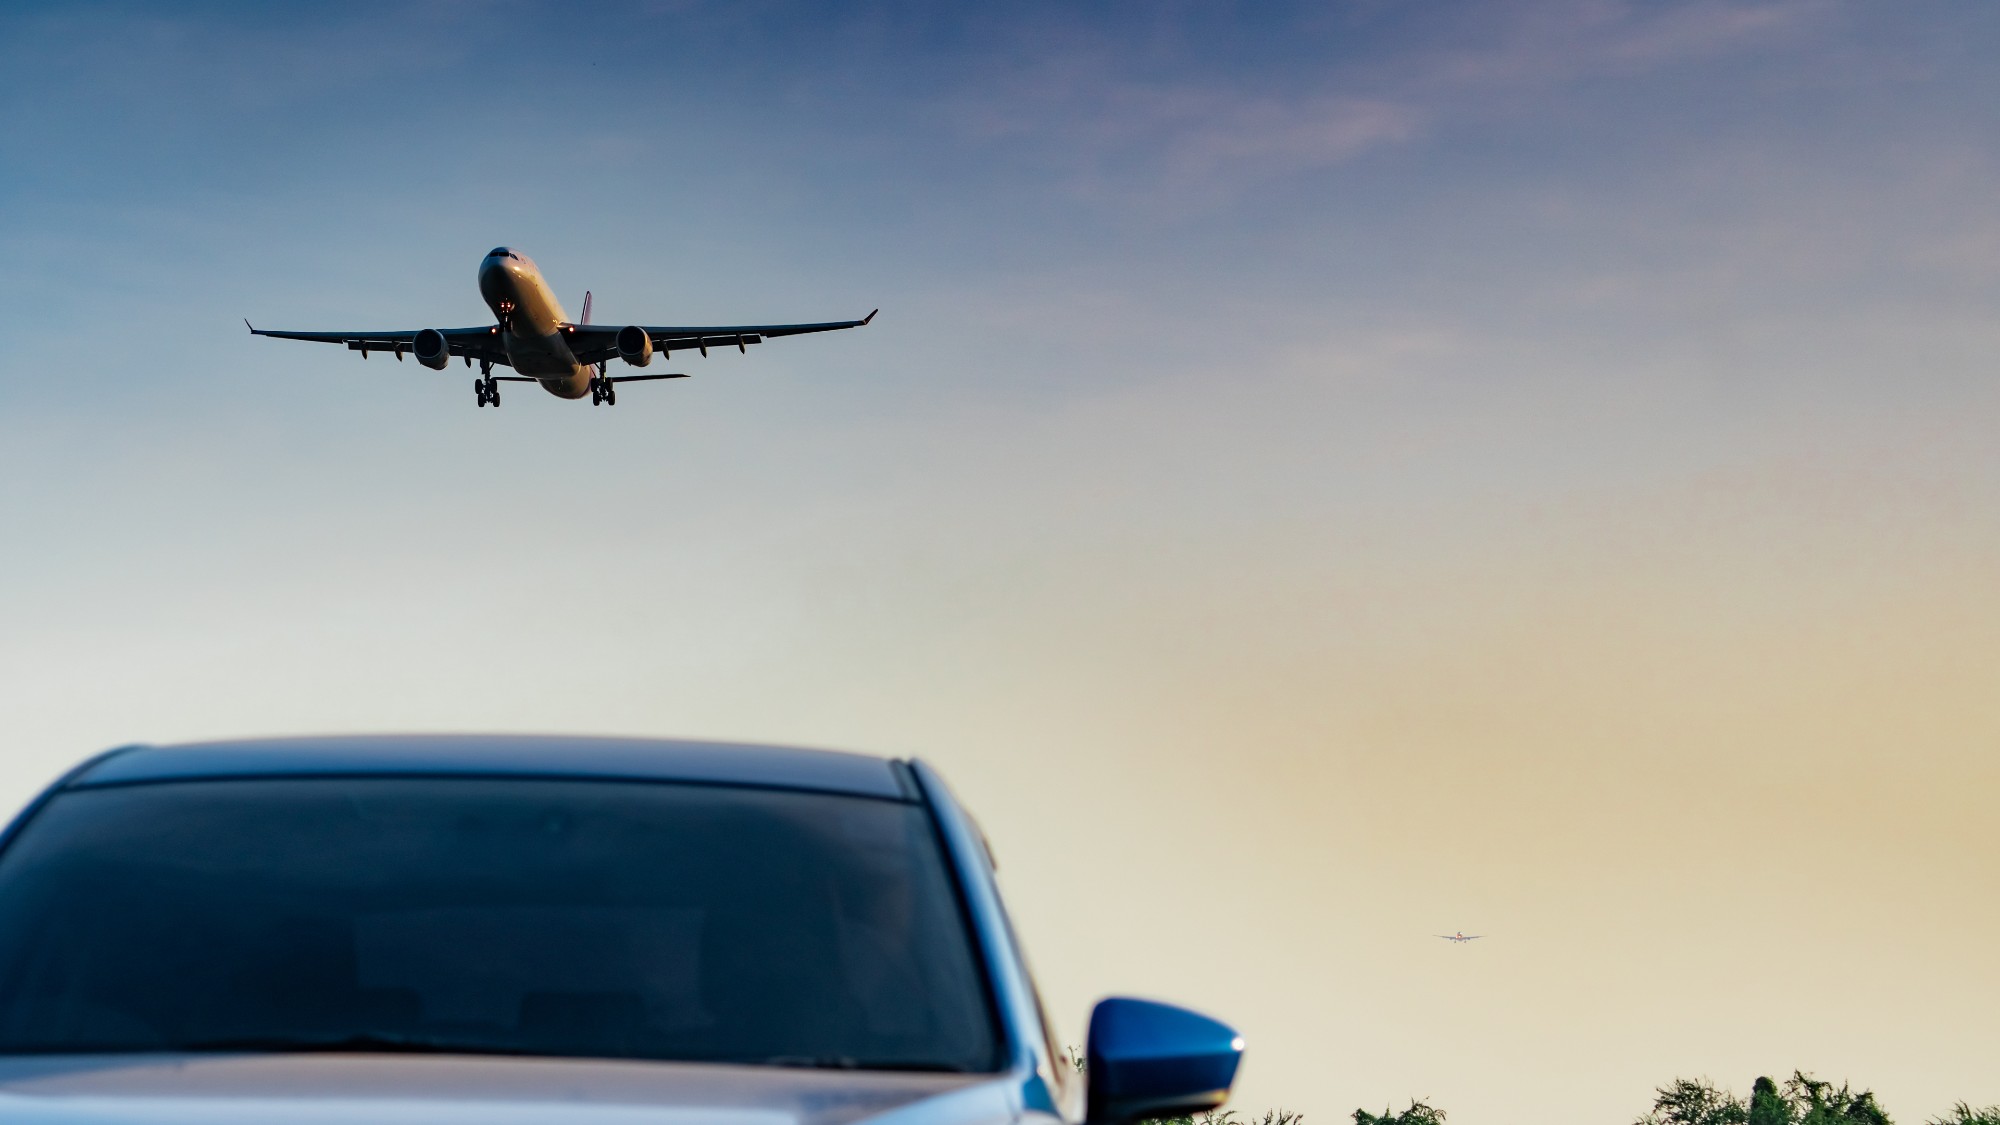  Should you fly or drive on your next trip? Here's how to decide. 